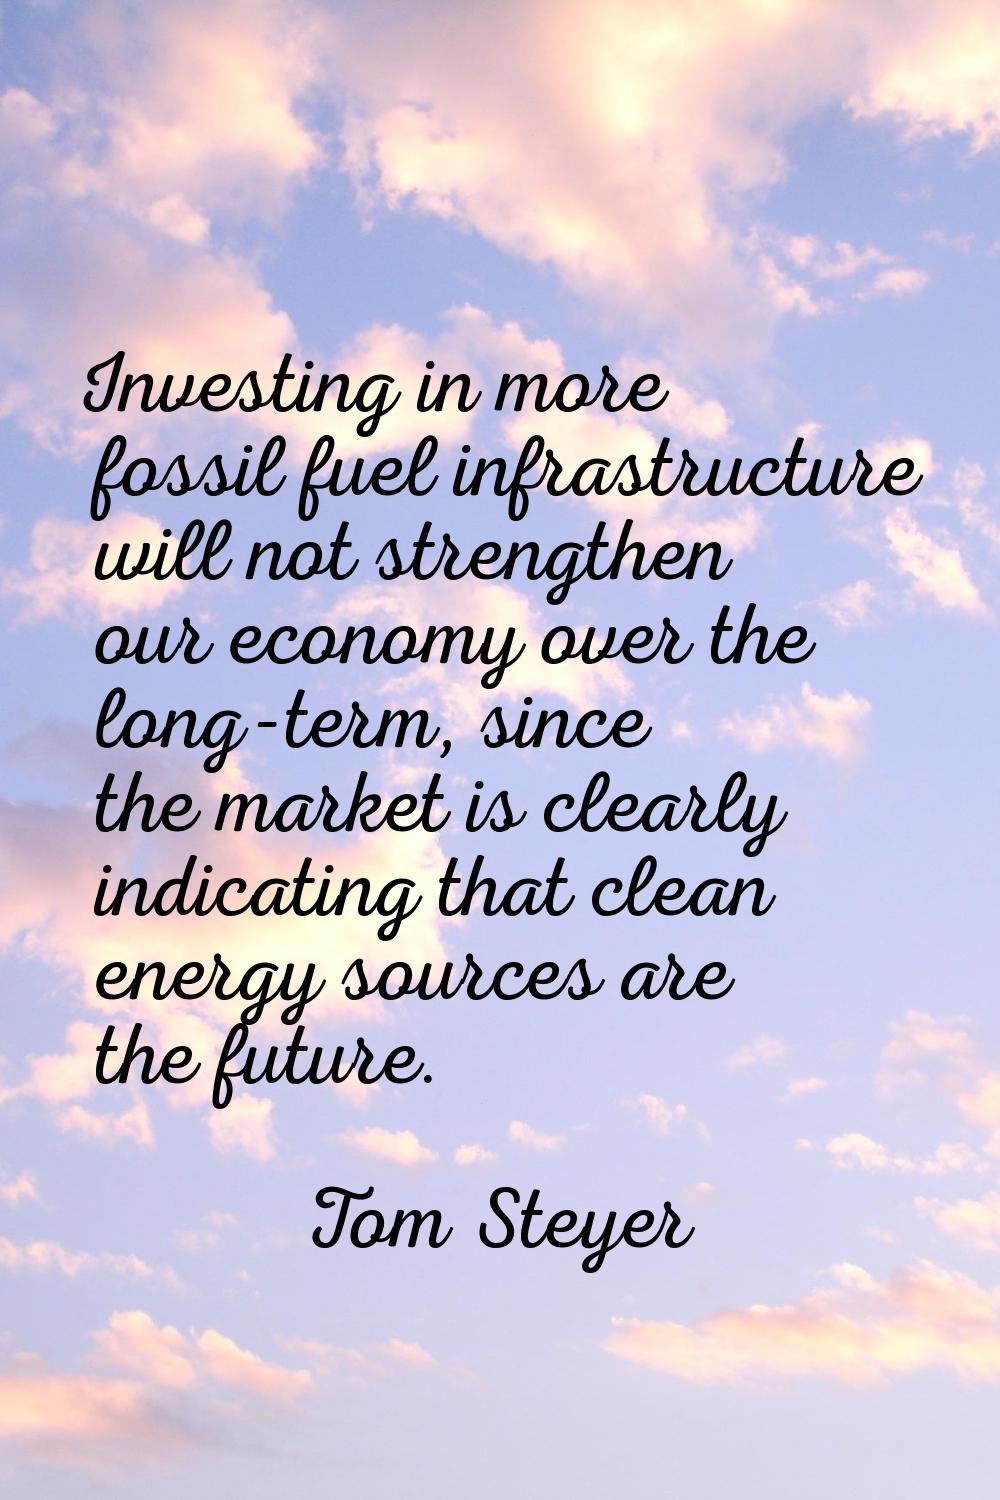 Investing in more fossil fuel infrastructure will not strengthen our economy over the long-term, si